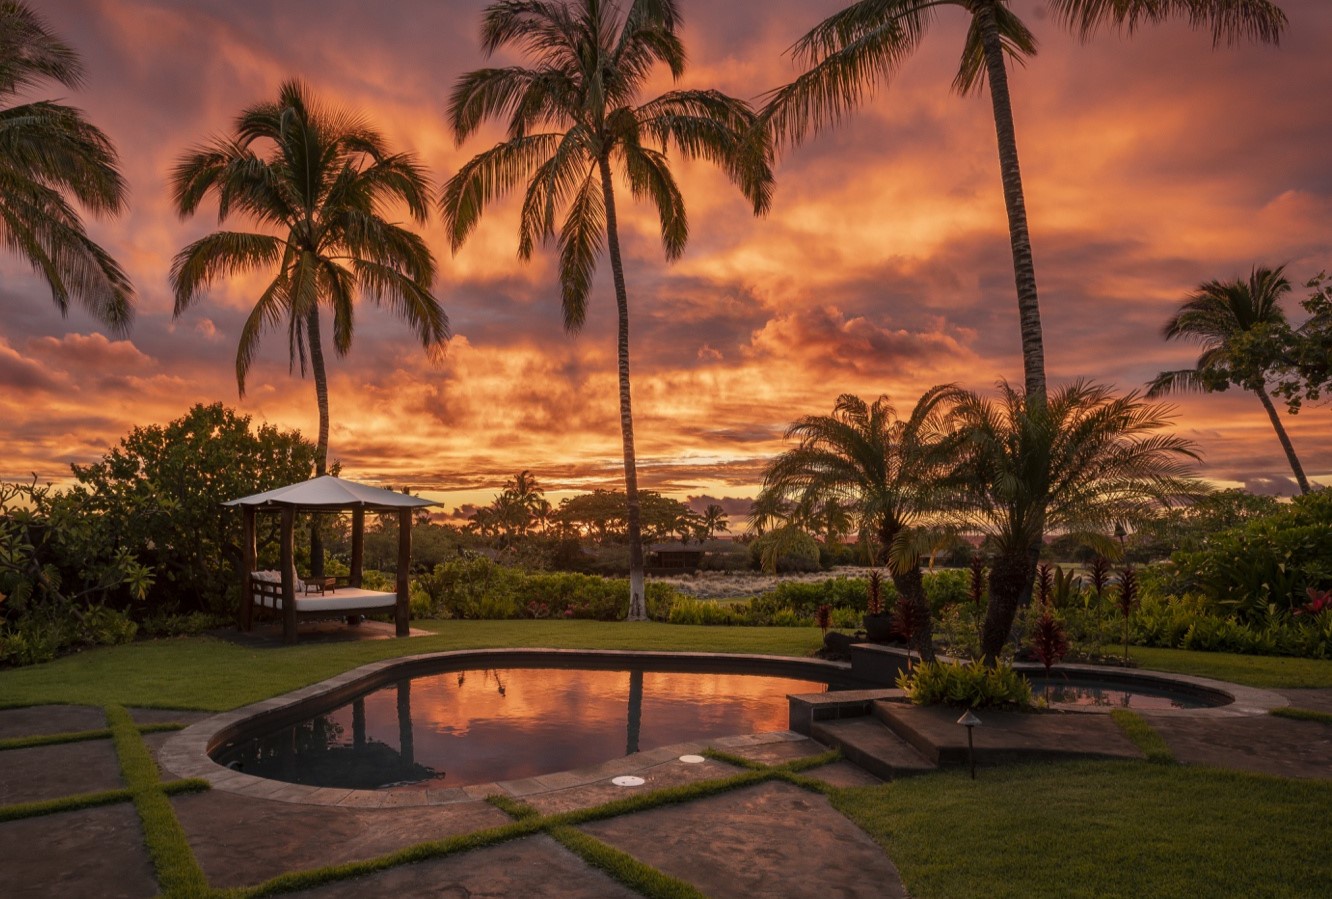 Kailua Kona Vacation Rentals, 4BD Kahikole Street (218) Estate Home at Four Seasons Resort at Hualalai - Embrace extraordinary views from your private oasis in paradise